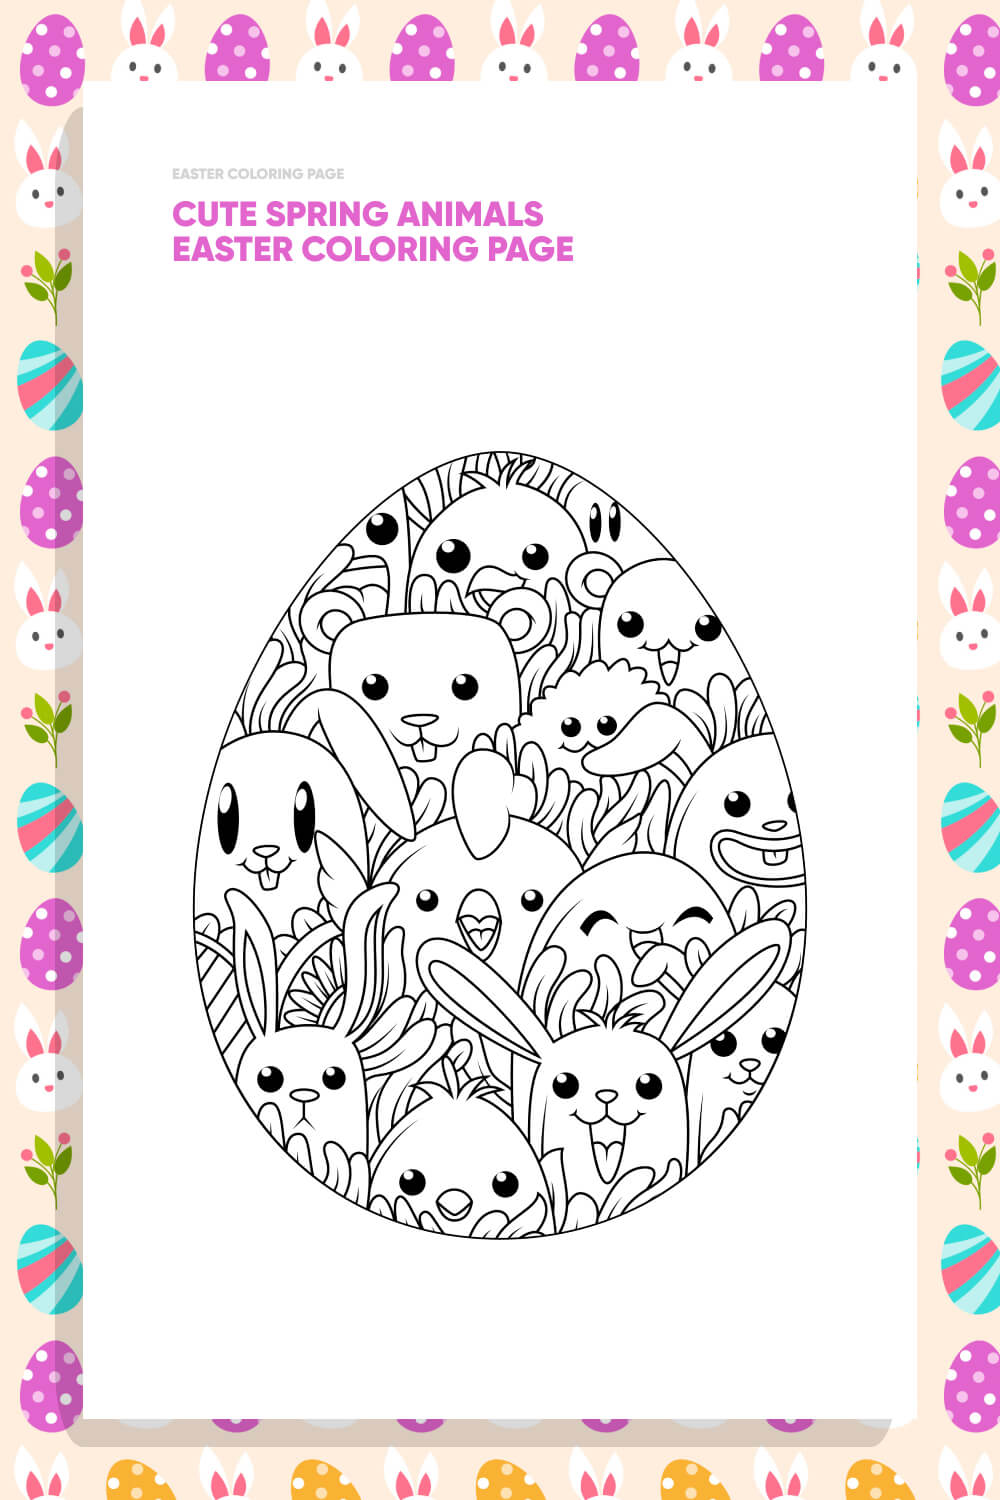 Cute Spring Animals Easter Coloring Page pinterest.